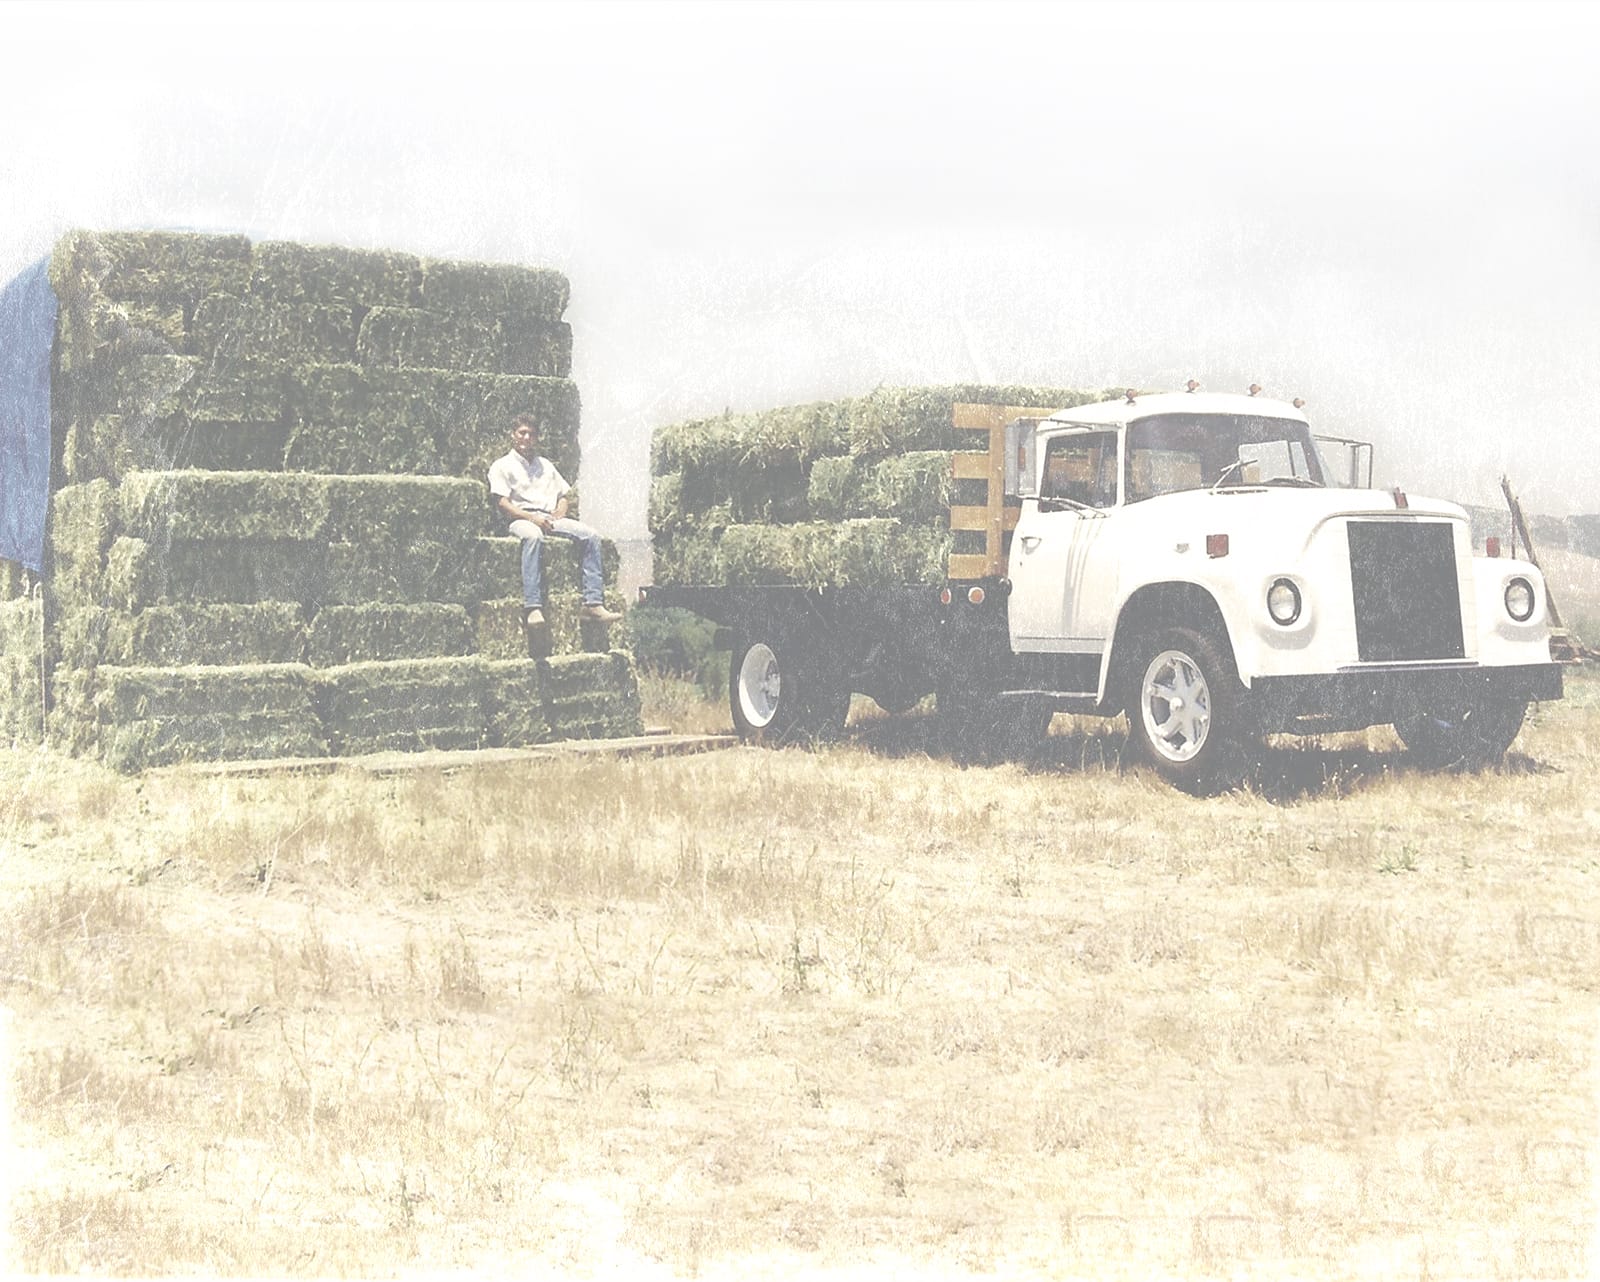 Mike sitting on a stack of hay next to a loaded pickup truck